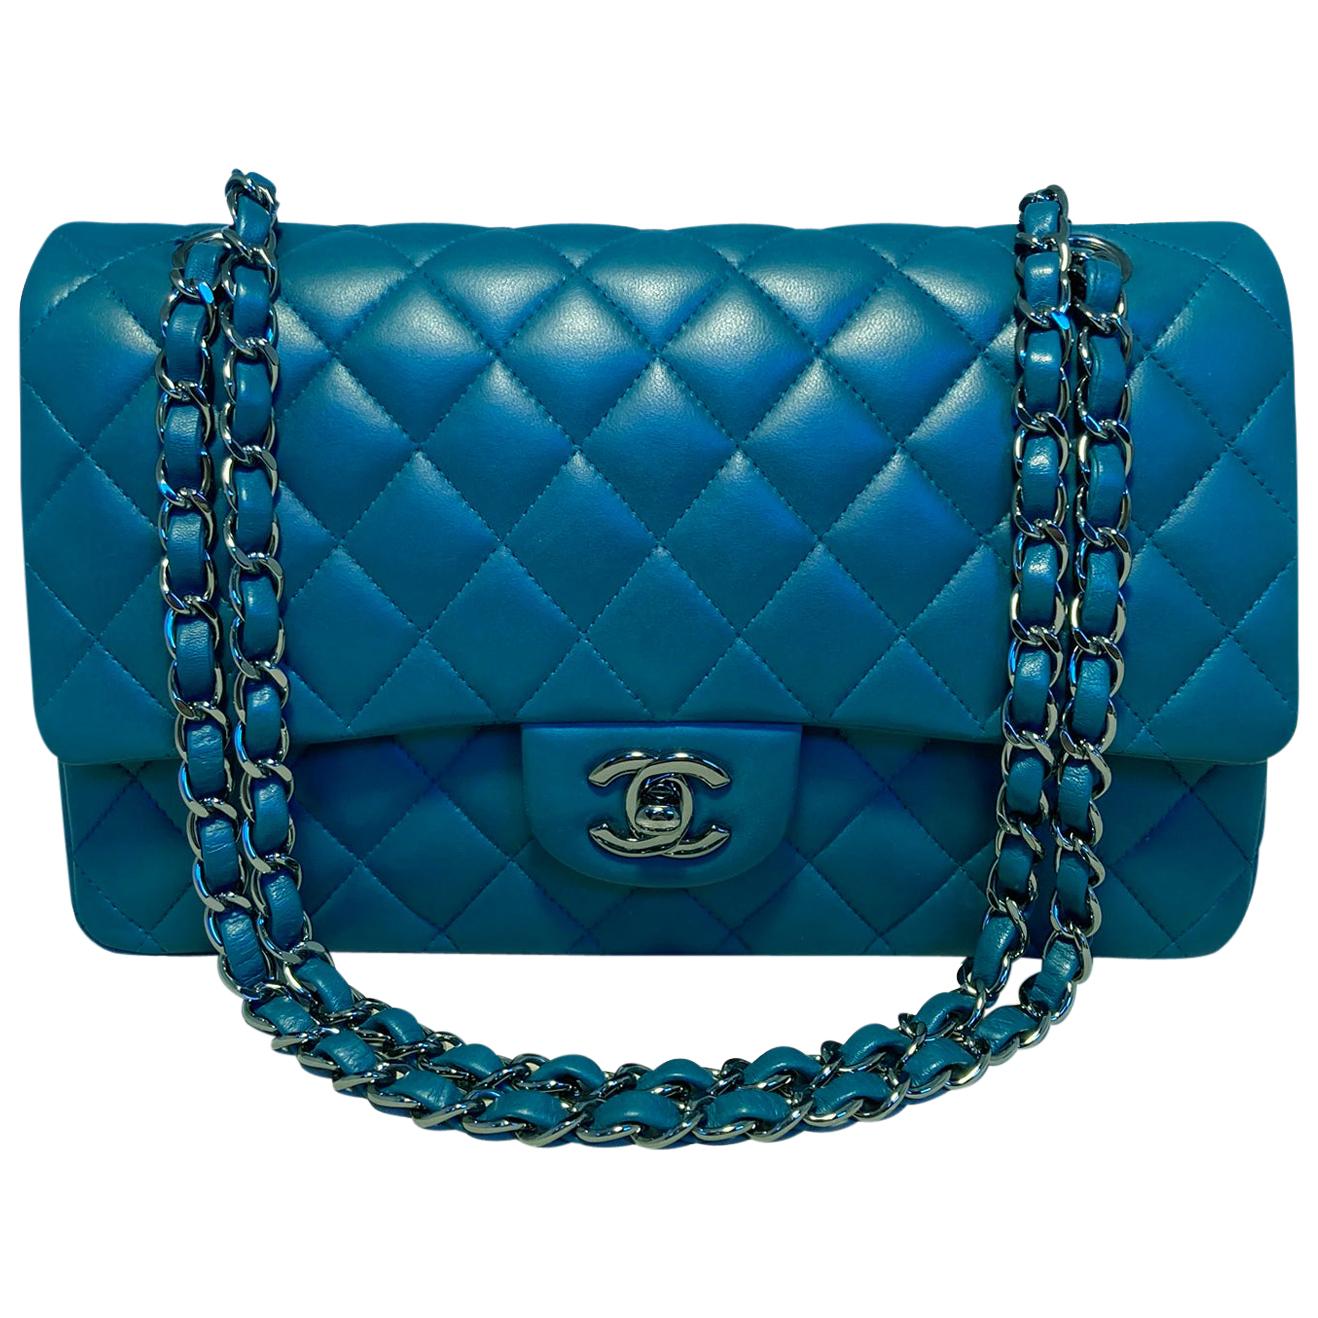 Chanel 2.55 Double Flap Classic Teal Leather Shoulder Bag at 1stDibs